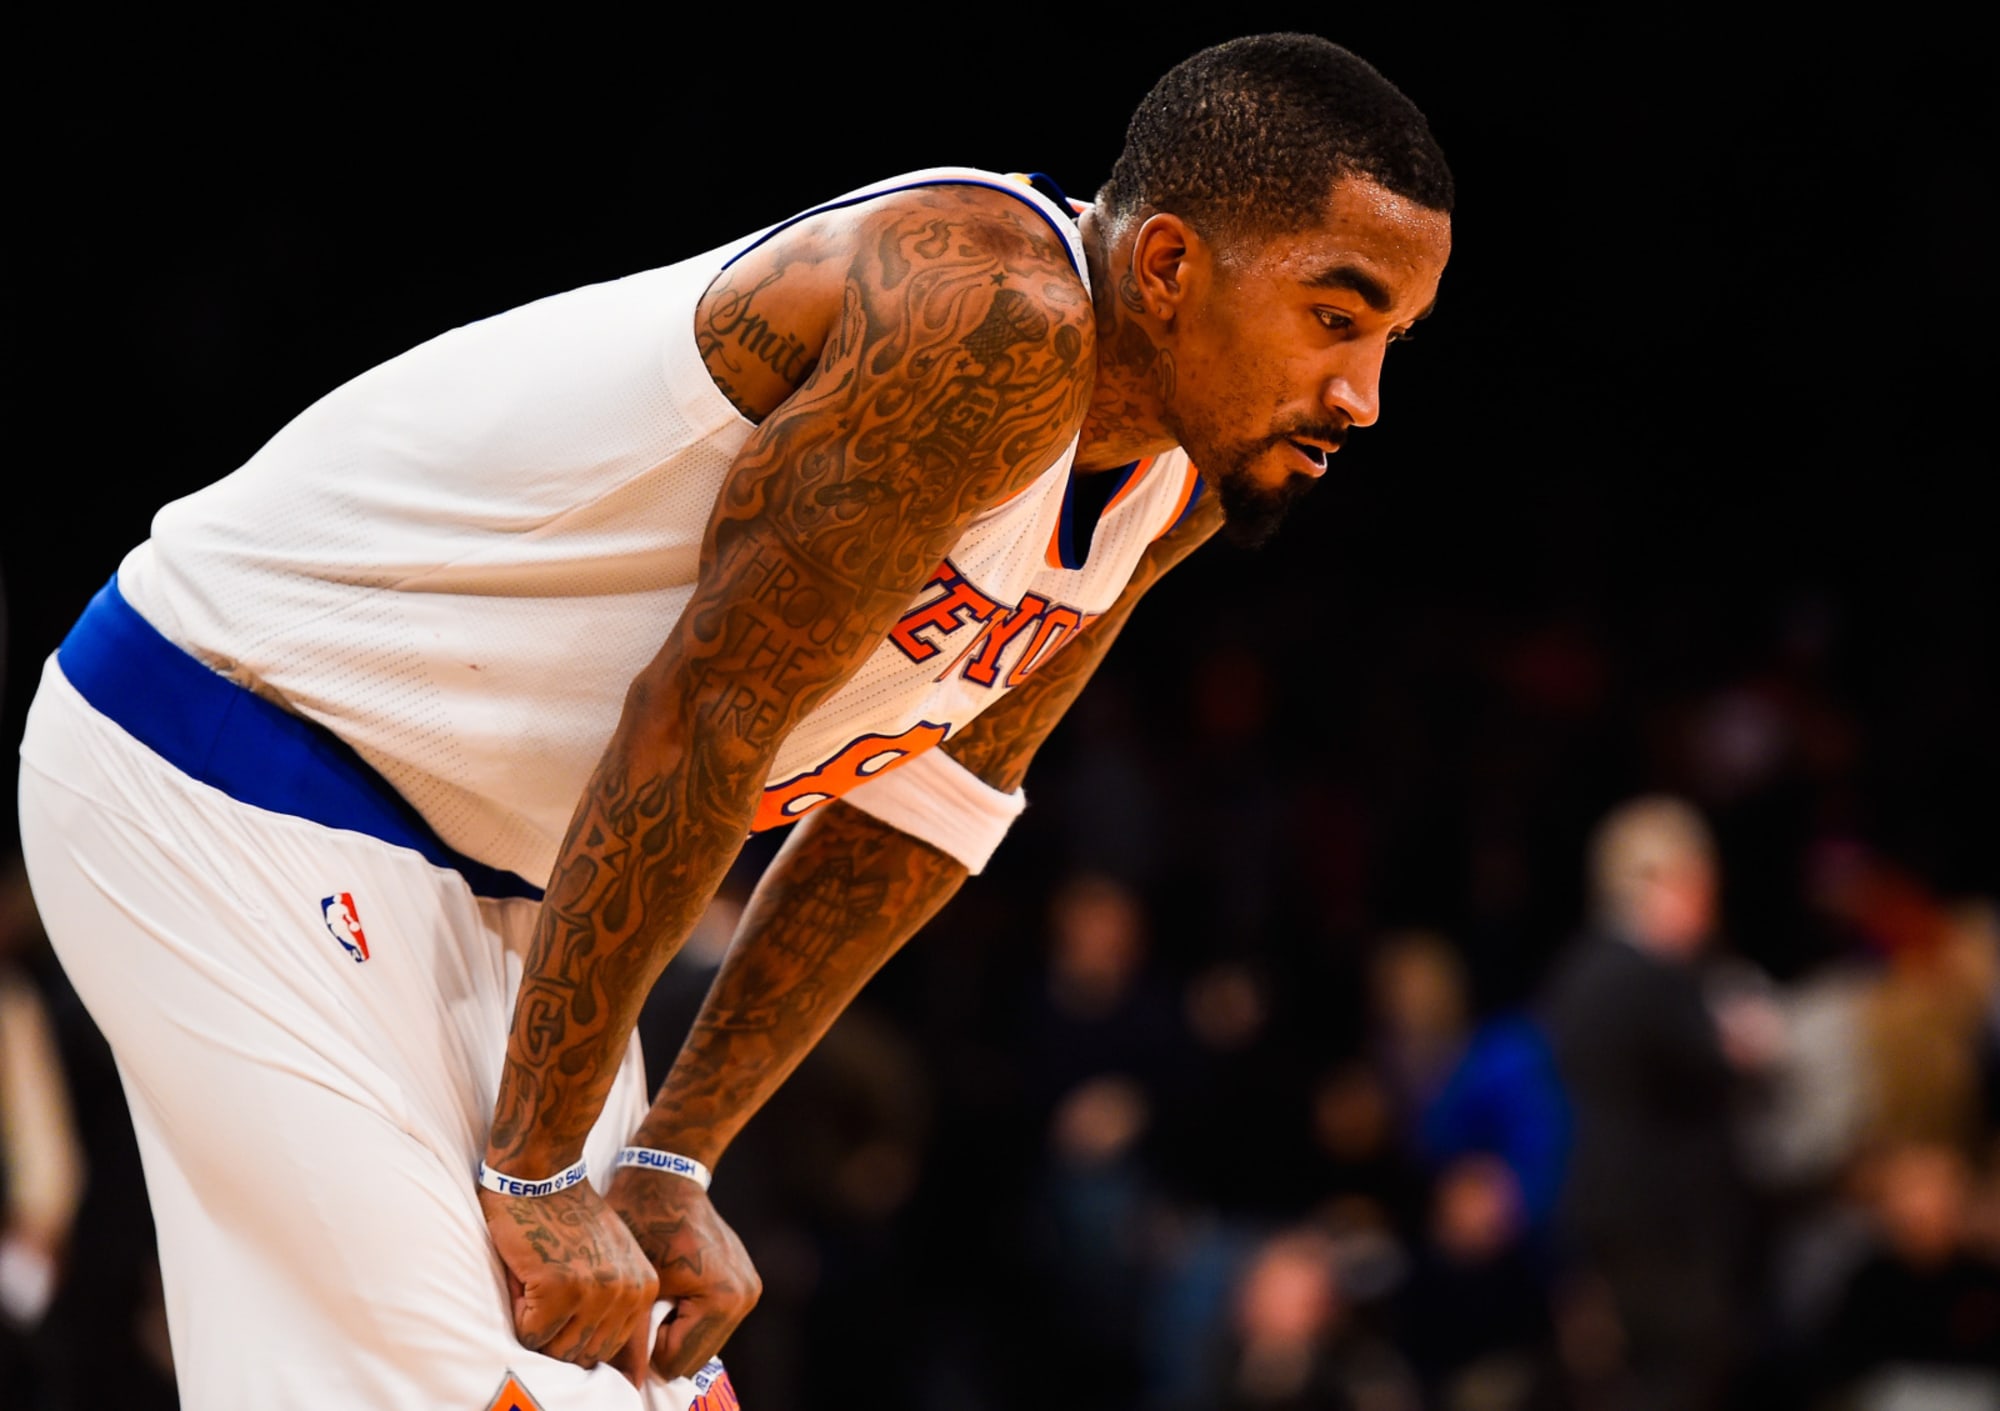 Knicks guard J.R. Smith suspended 5 games